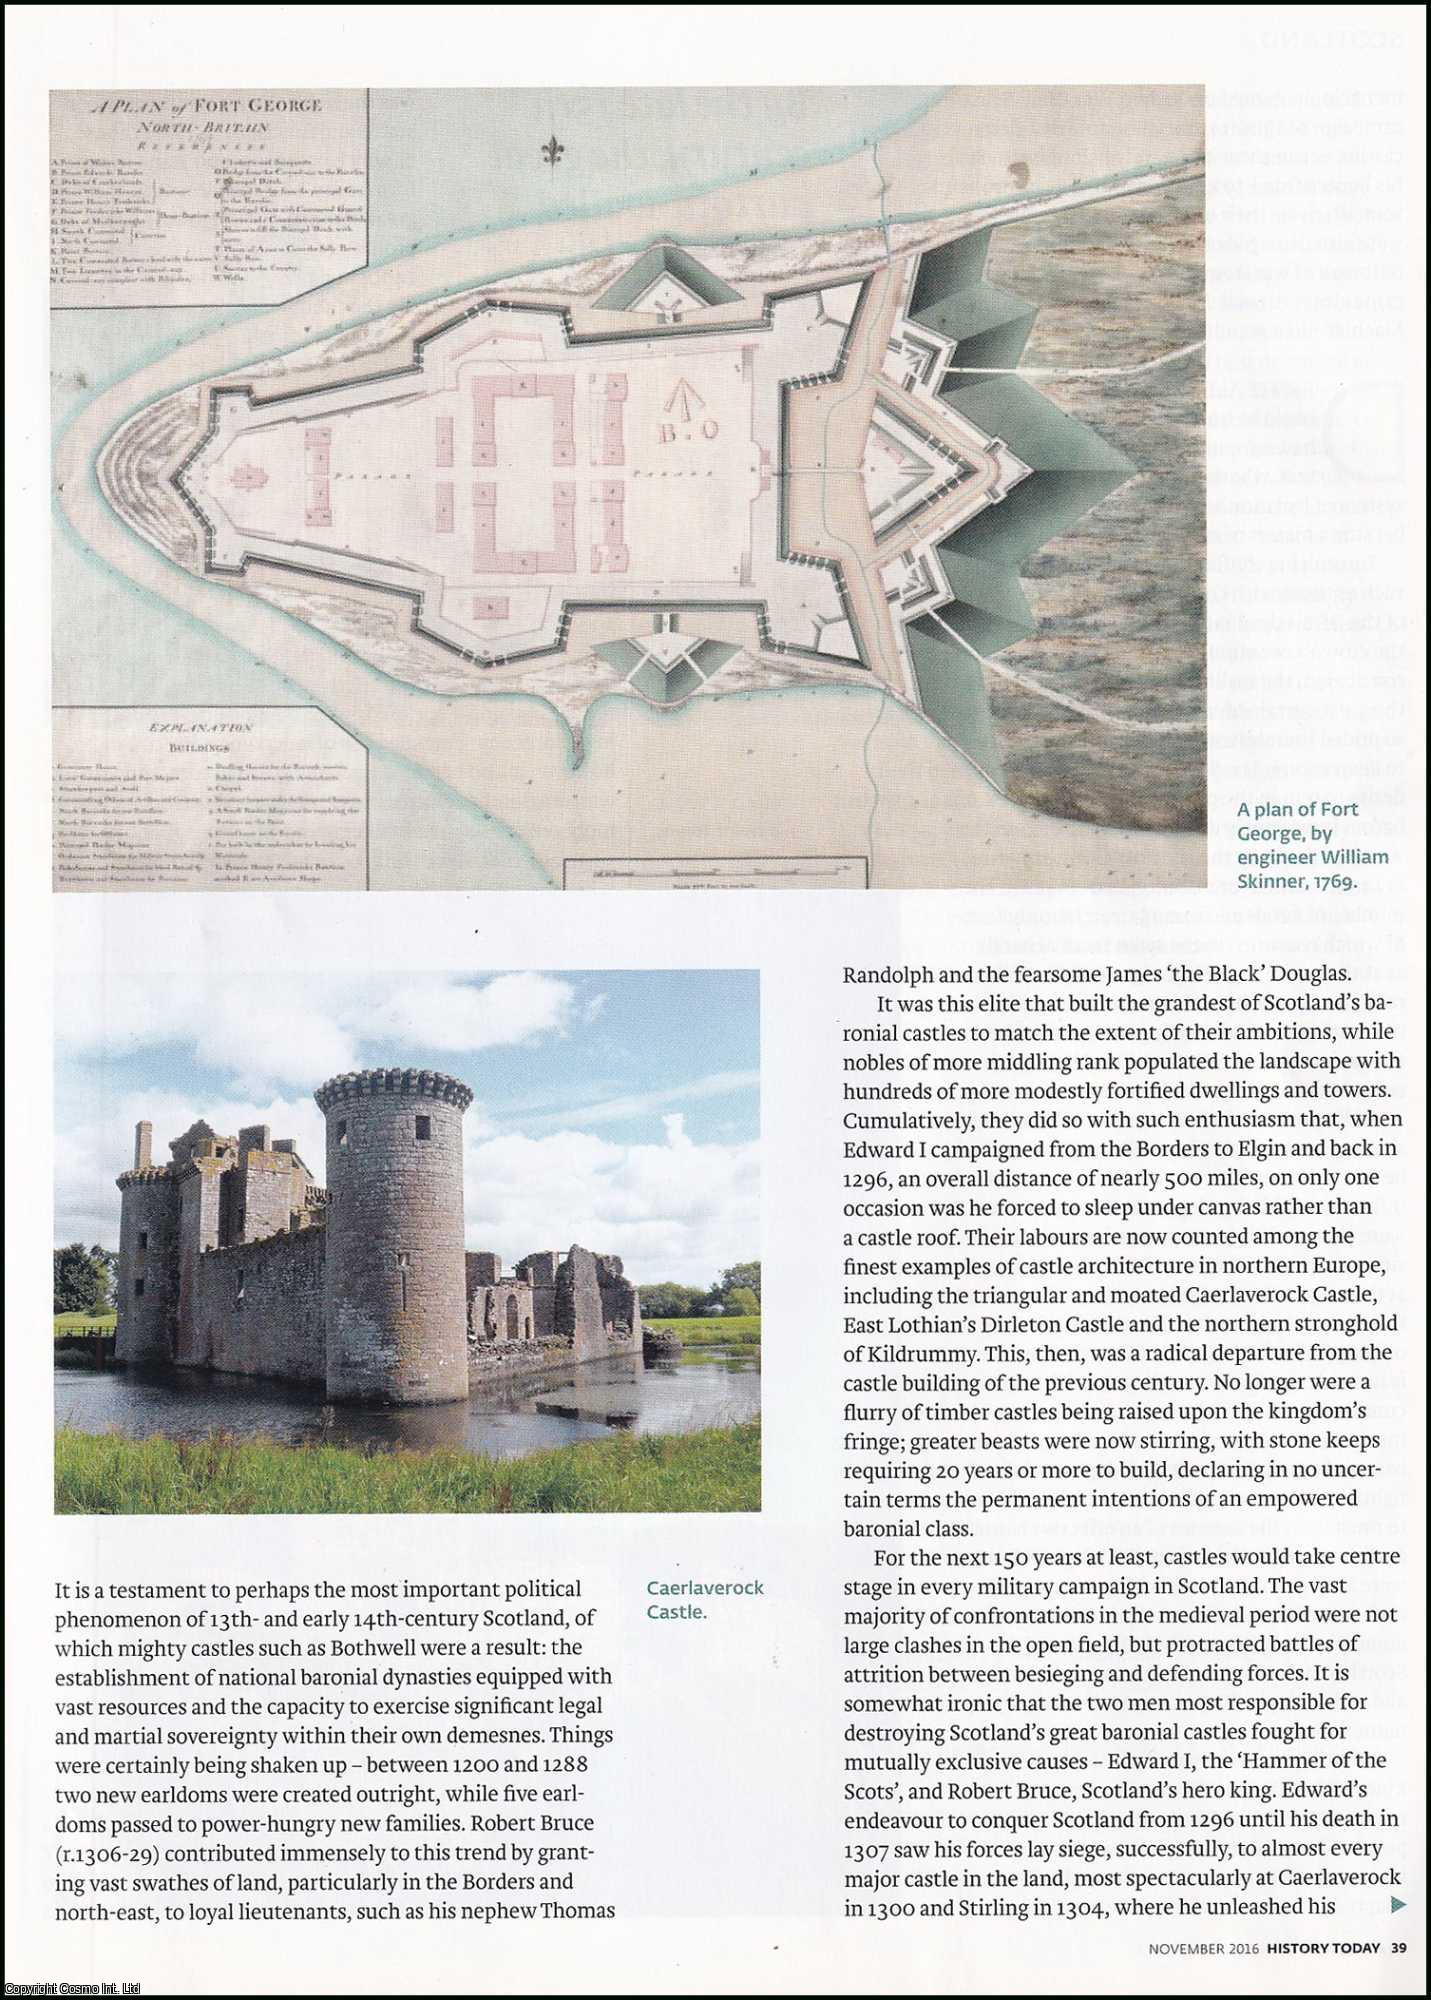 David C. Weinczok - Towers of Power: Has Scotland's Castle Culture defined the History of the Country? An original article from History Today magazine, 2016.